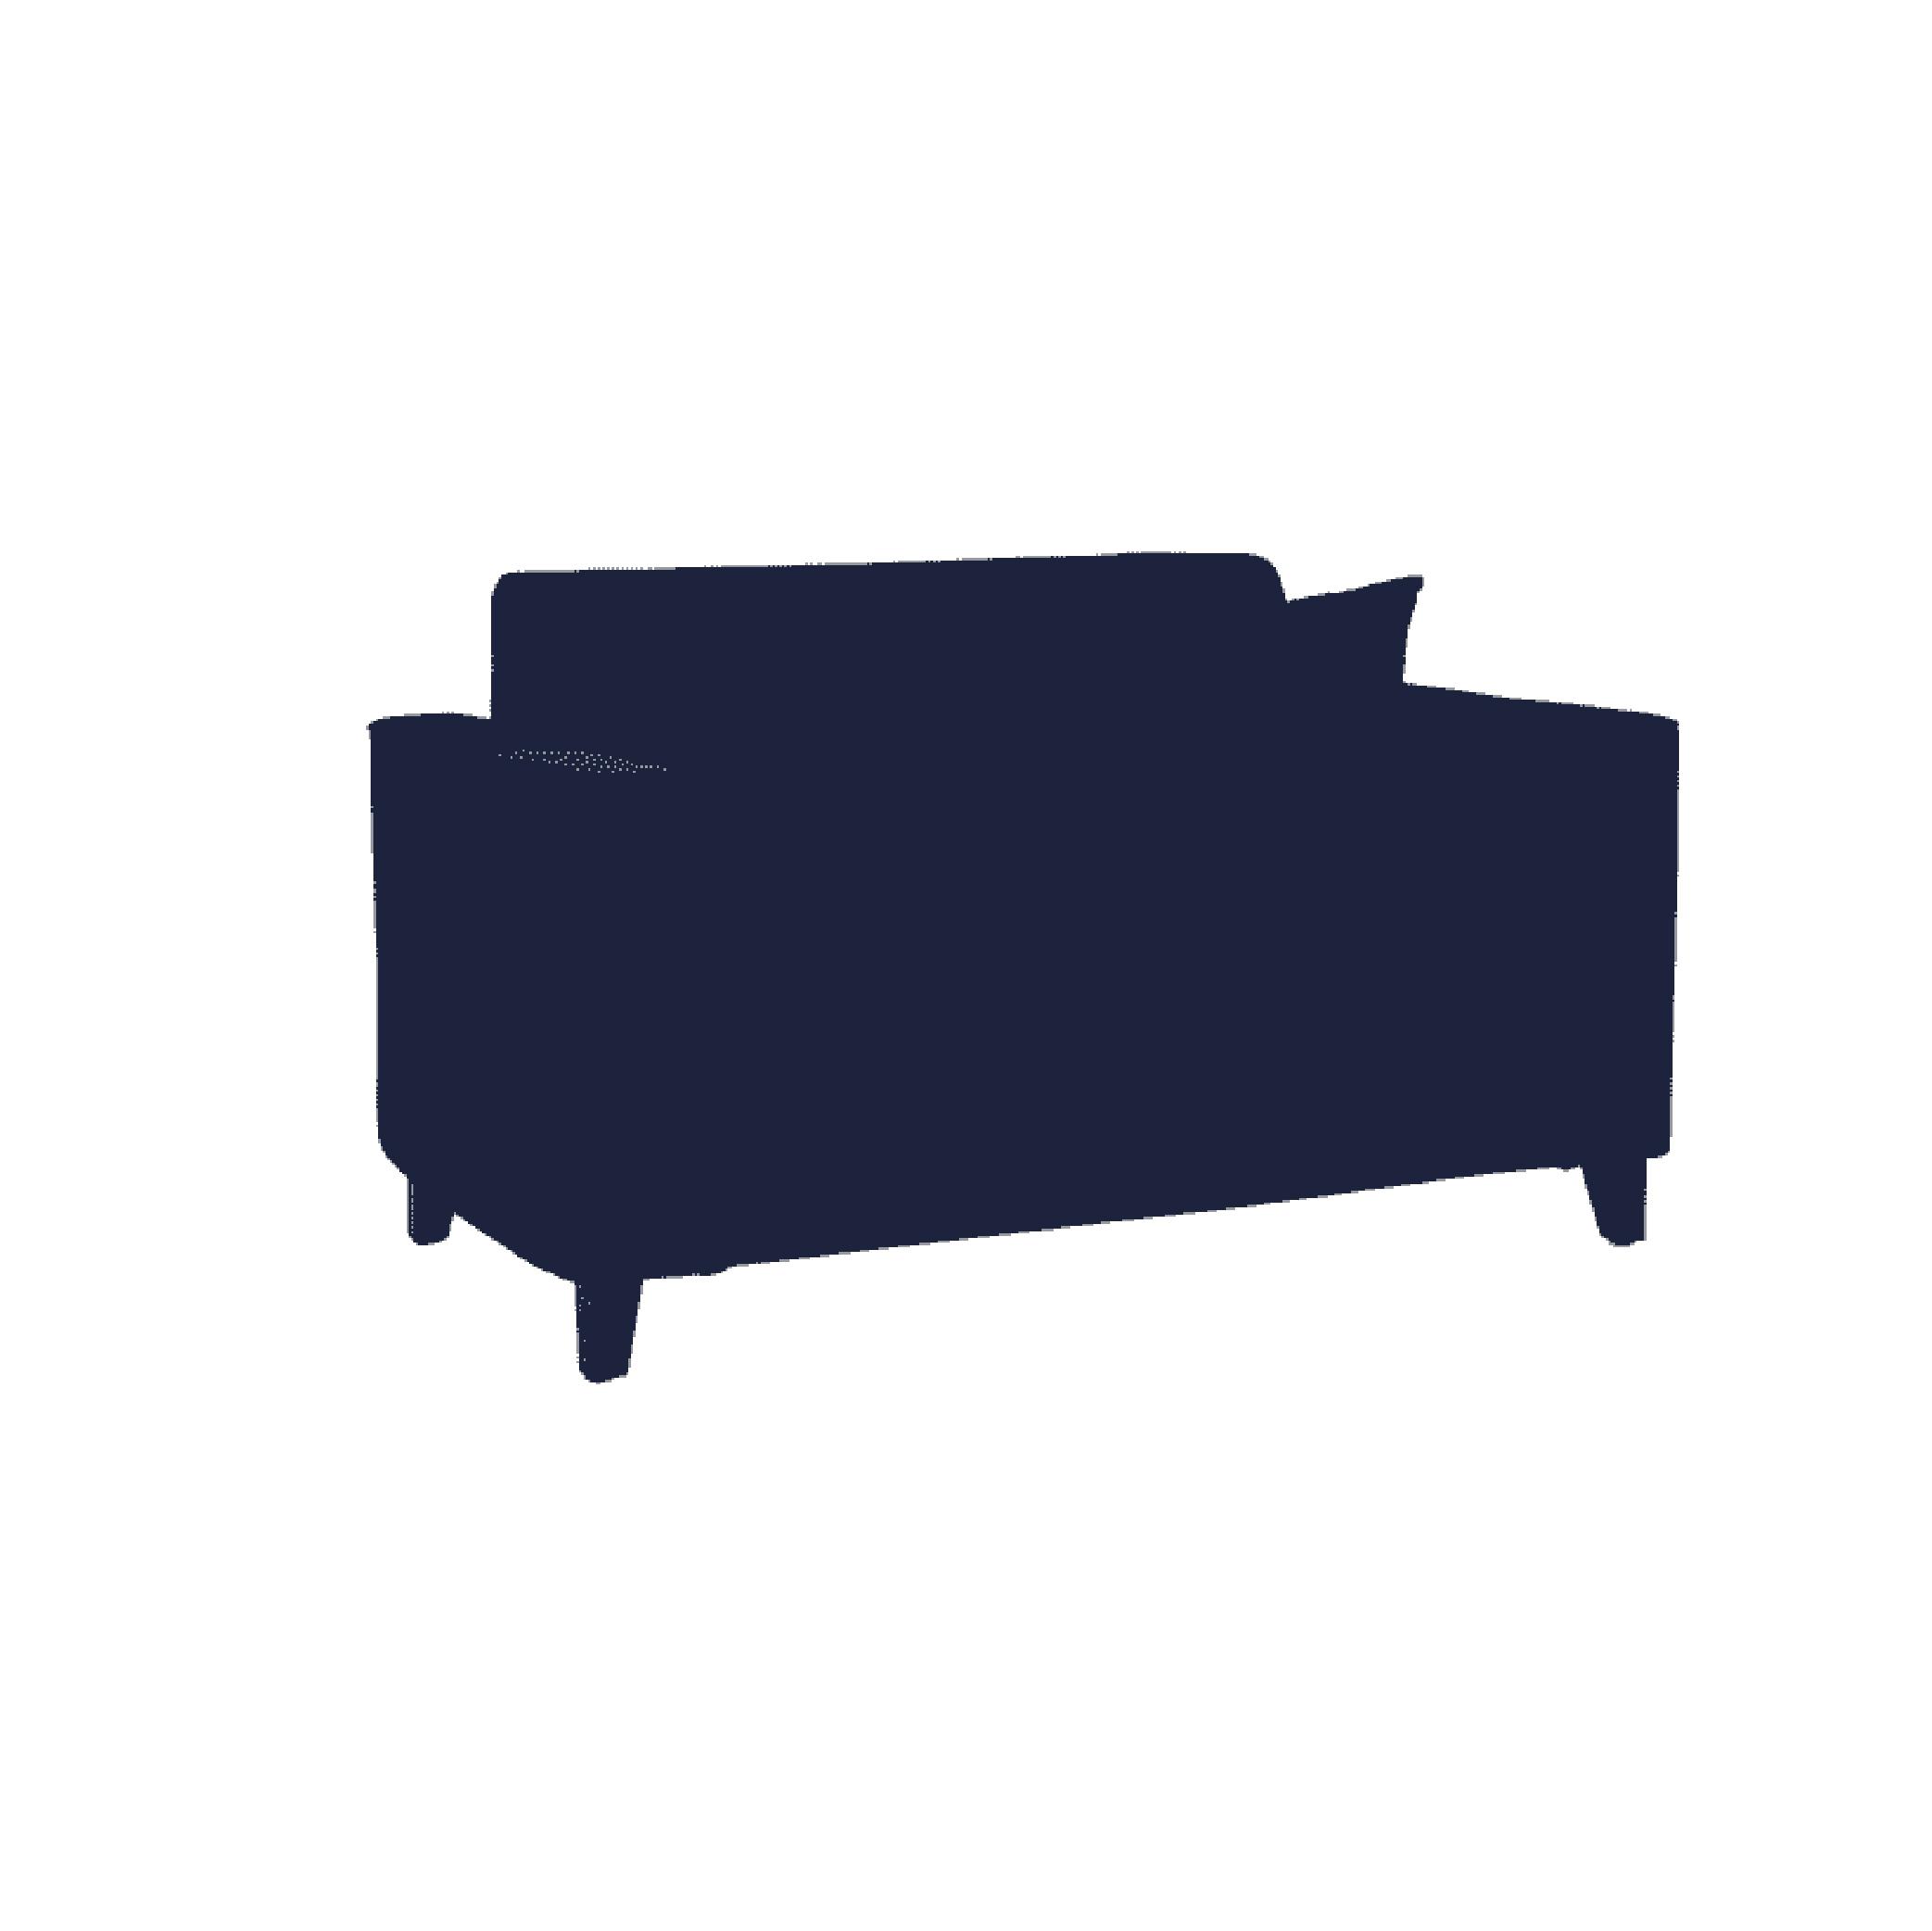 Faenza Two Seater Sofa in Navy Blue Colour